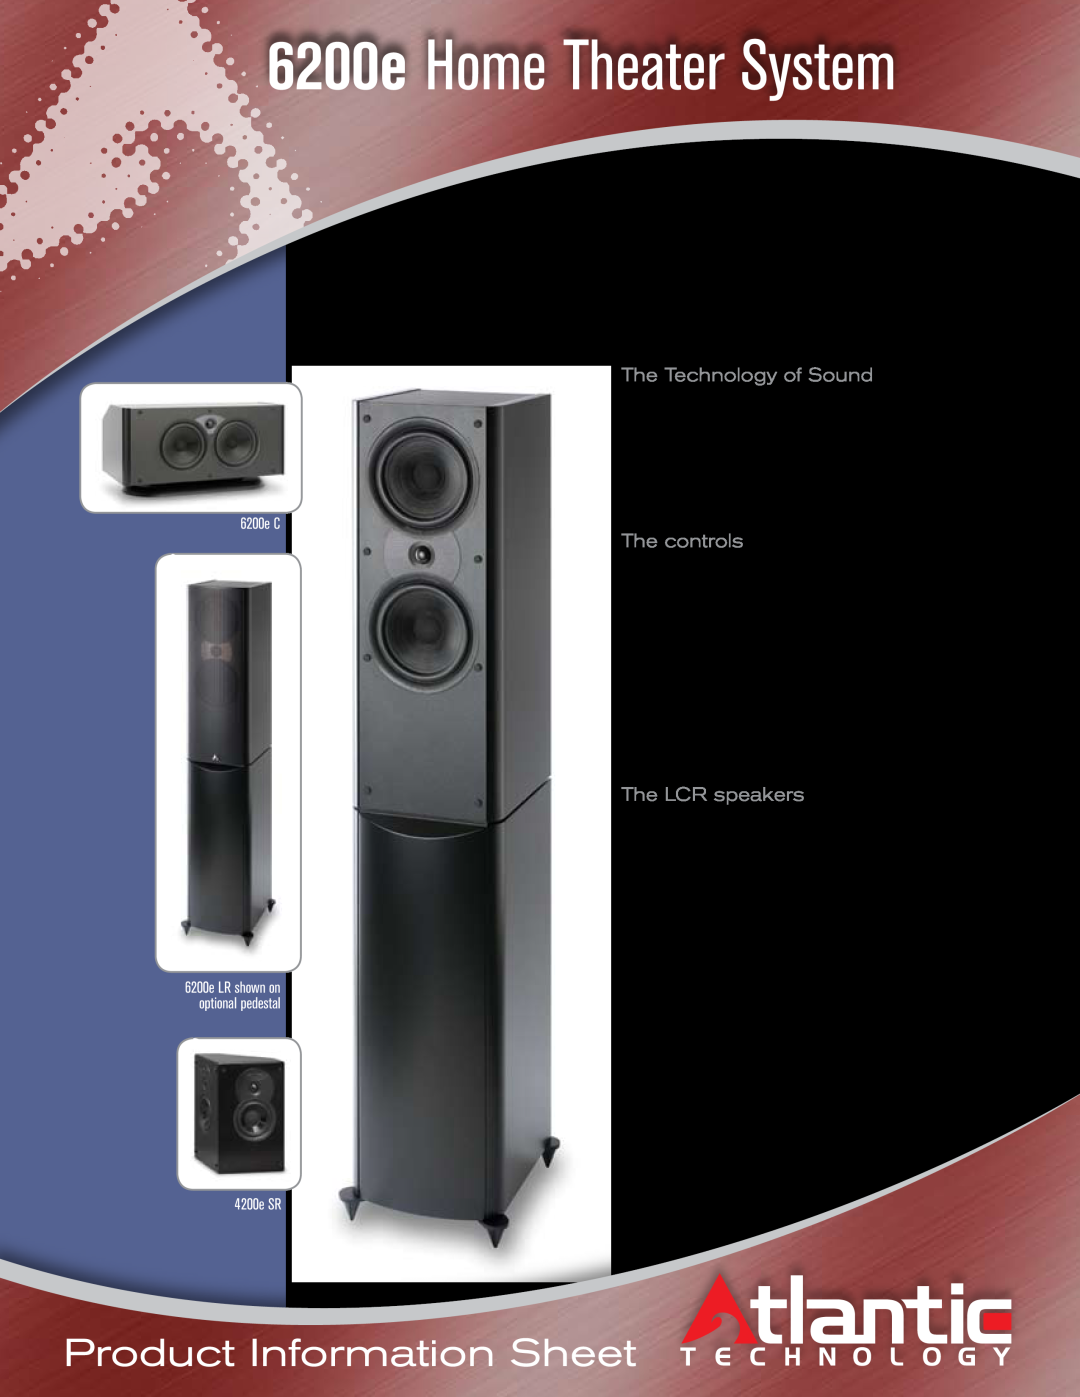 Atlantic Technology manual 6200e Home Theater System, The Technology of Sound, The controls, The LCR speakers, 6200e C 